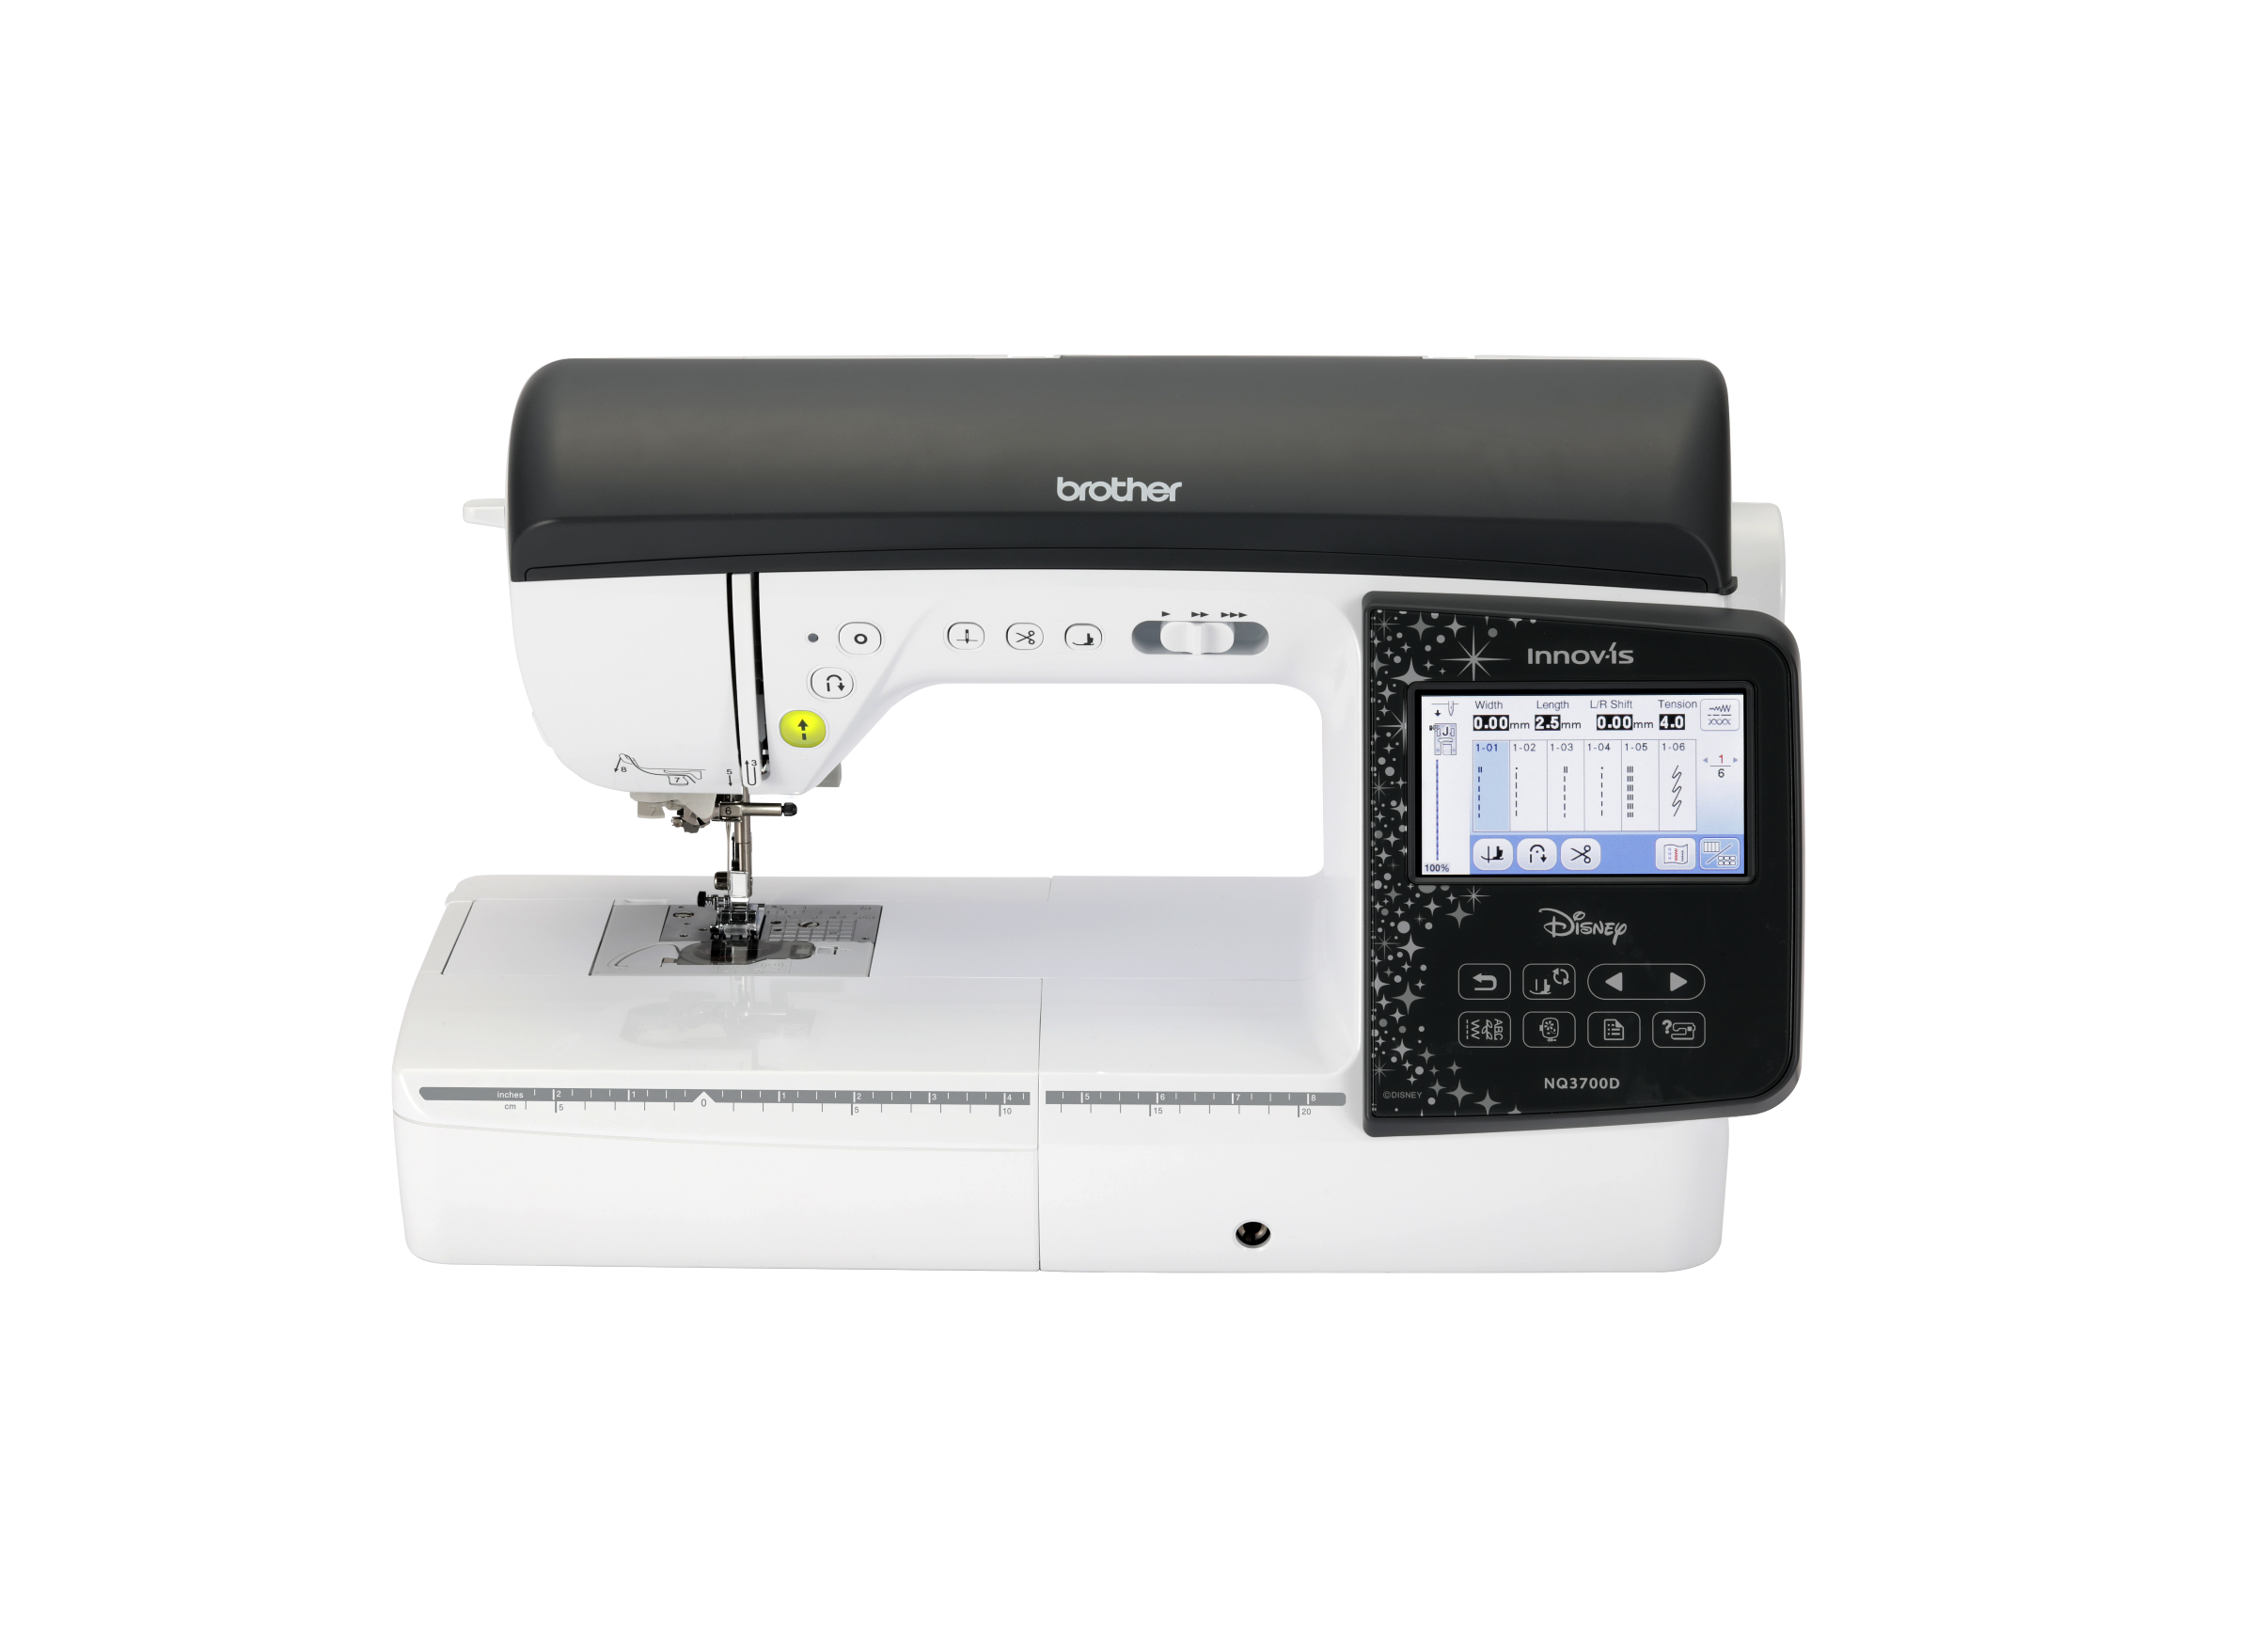 Brother Innov-is NQ3700D Sewing and Embroidery Machine 10x6 for Sale at World Weidner